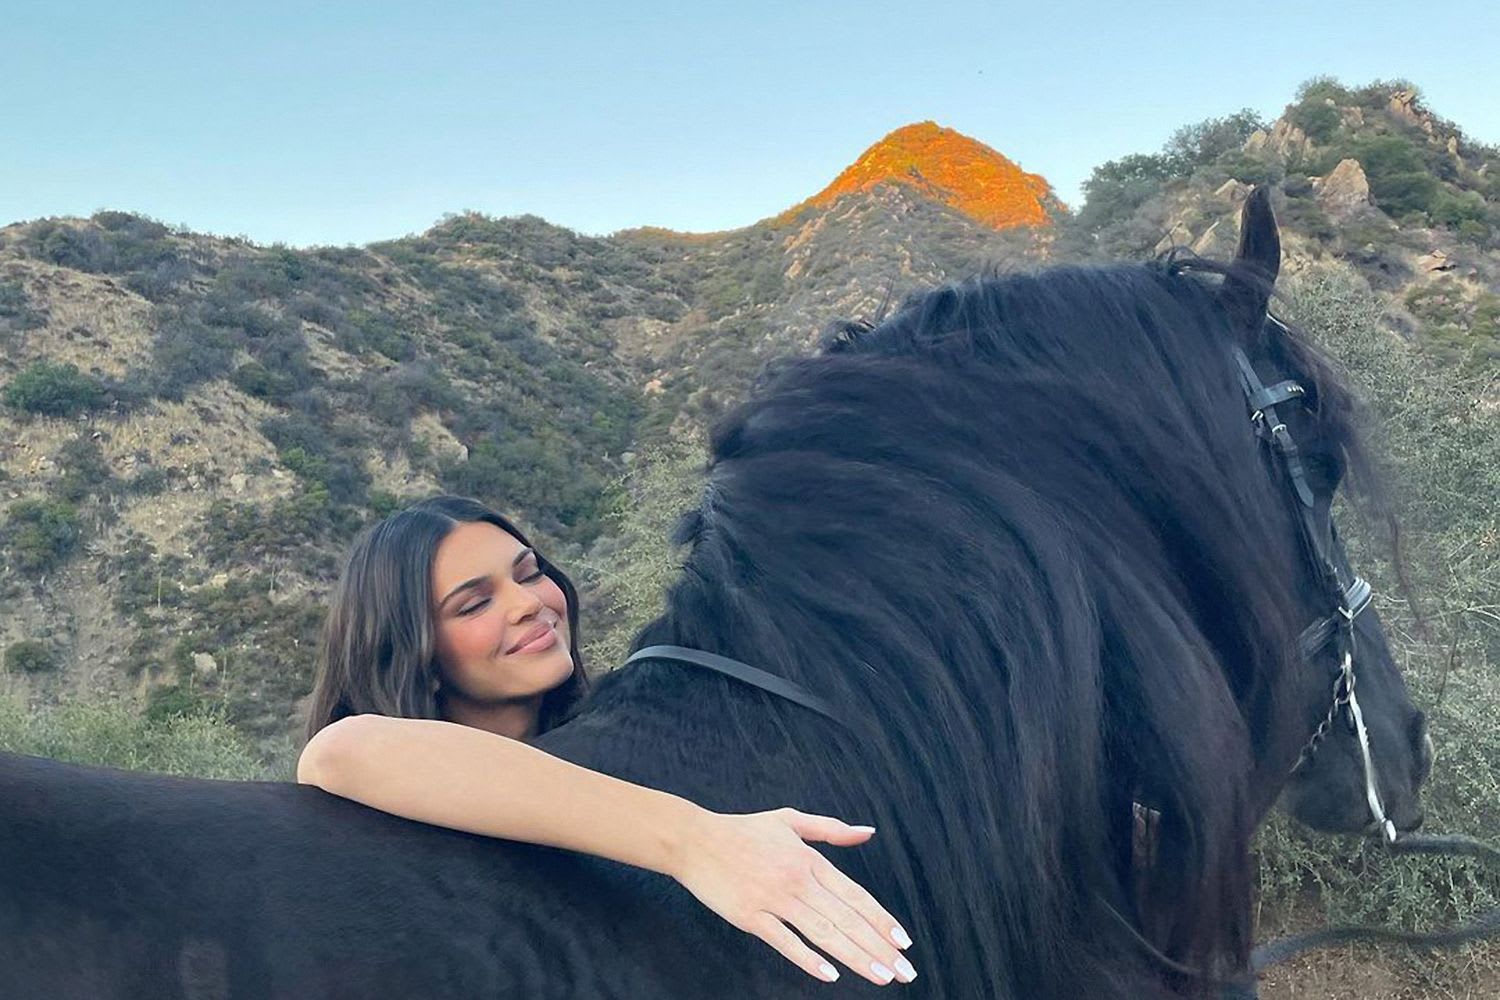 Kendall Jenner gets back on horse in body chains for Stella McCartney  campaign